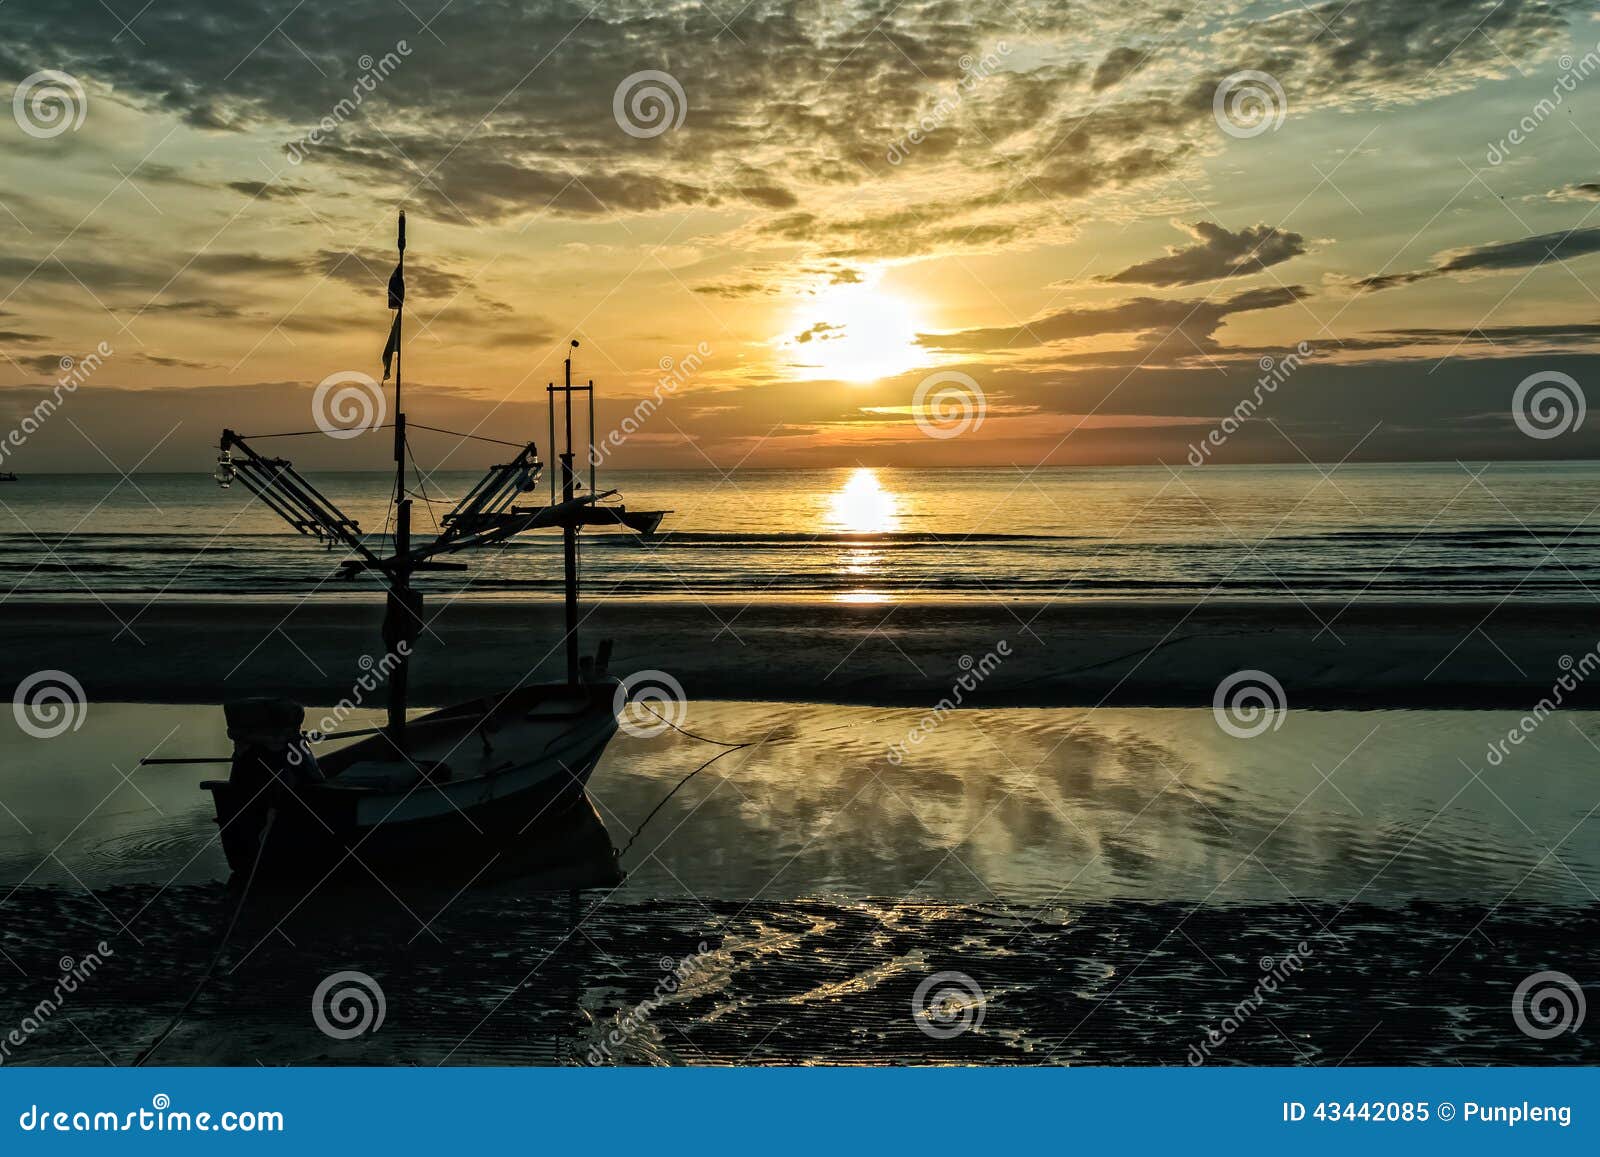 Seascape and Fisherman boat in dramatic sky.